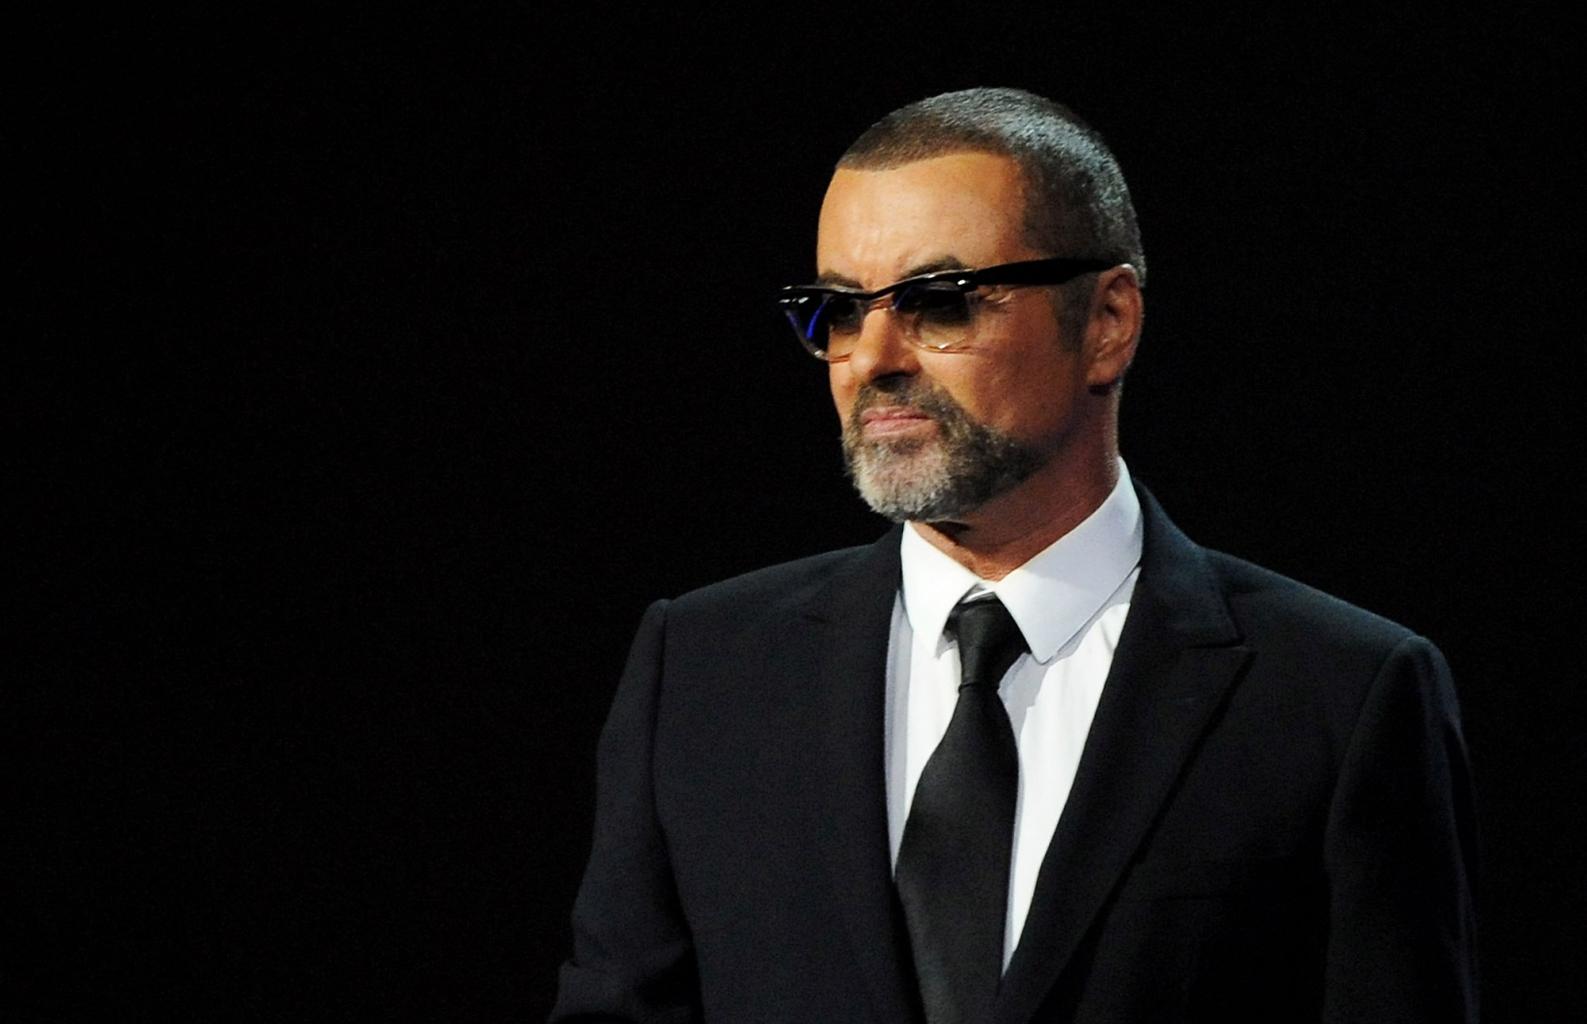        Hard Drugs Had Been Back in His Life       ': George Michael       's Cousin Claims His Death Was Linked to a Drug Overdose